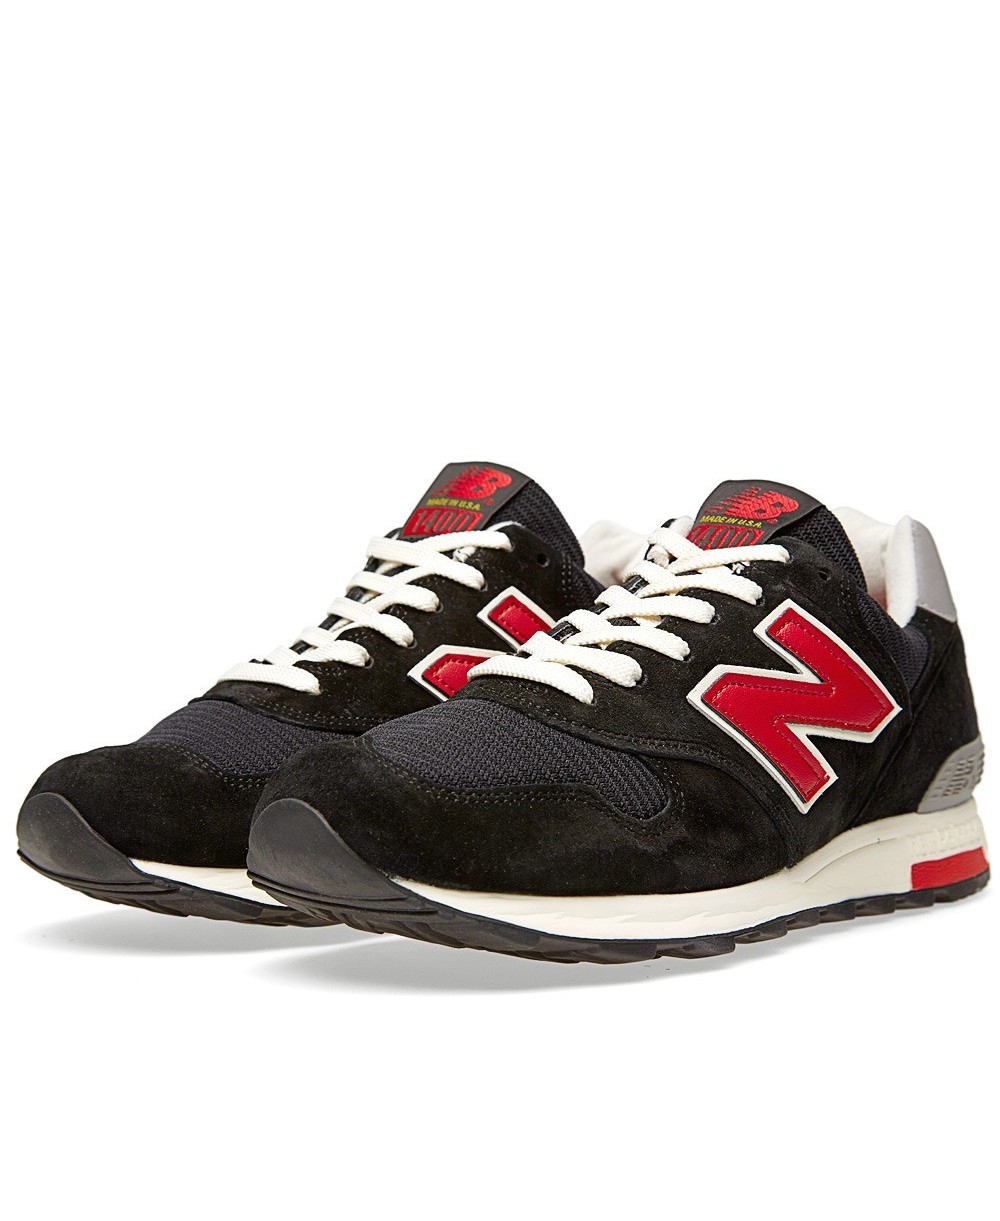 New Balance M1400 Made in USA Sneakers para Catcher ...